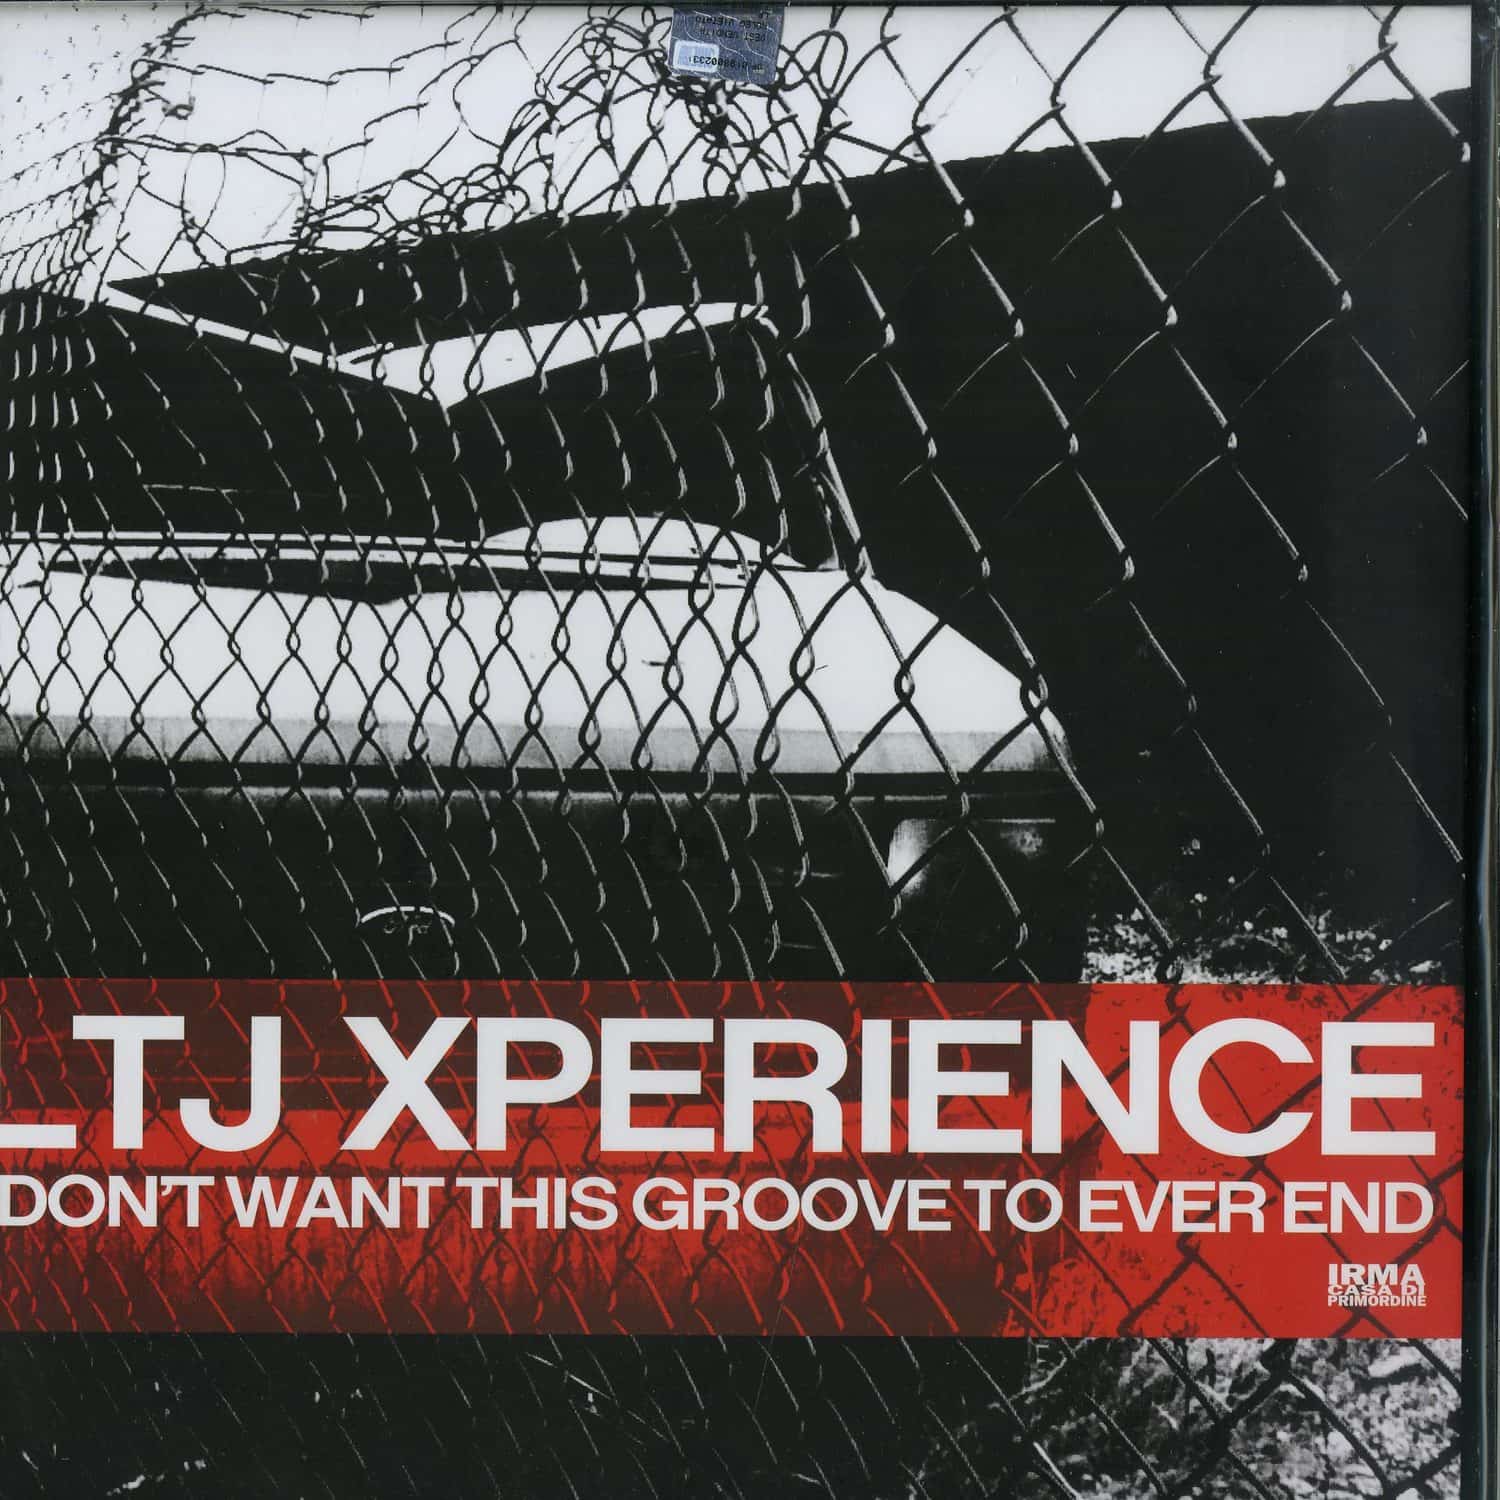 LTJ Xperience - I DONT WANT THIS GROOVE TO END 